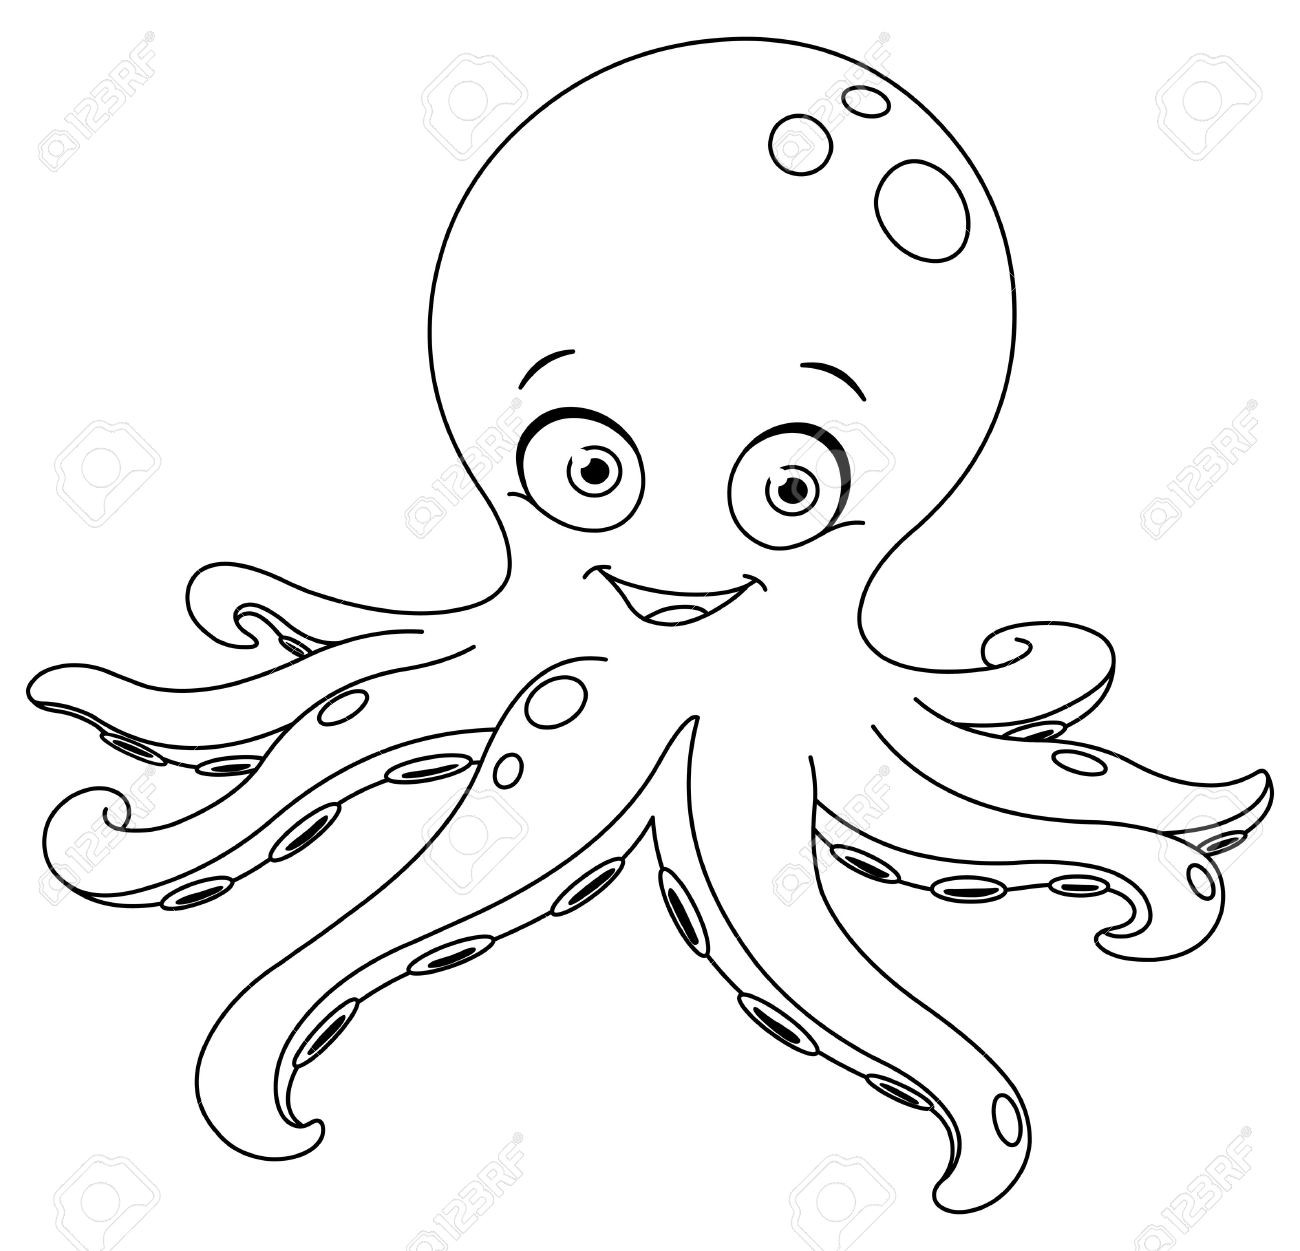 Octopus Coloring Sheet
 cute octopus coloring pages